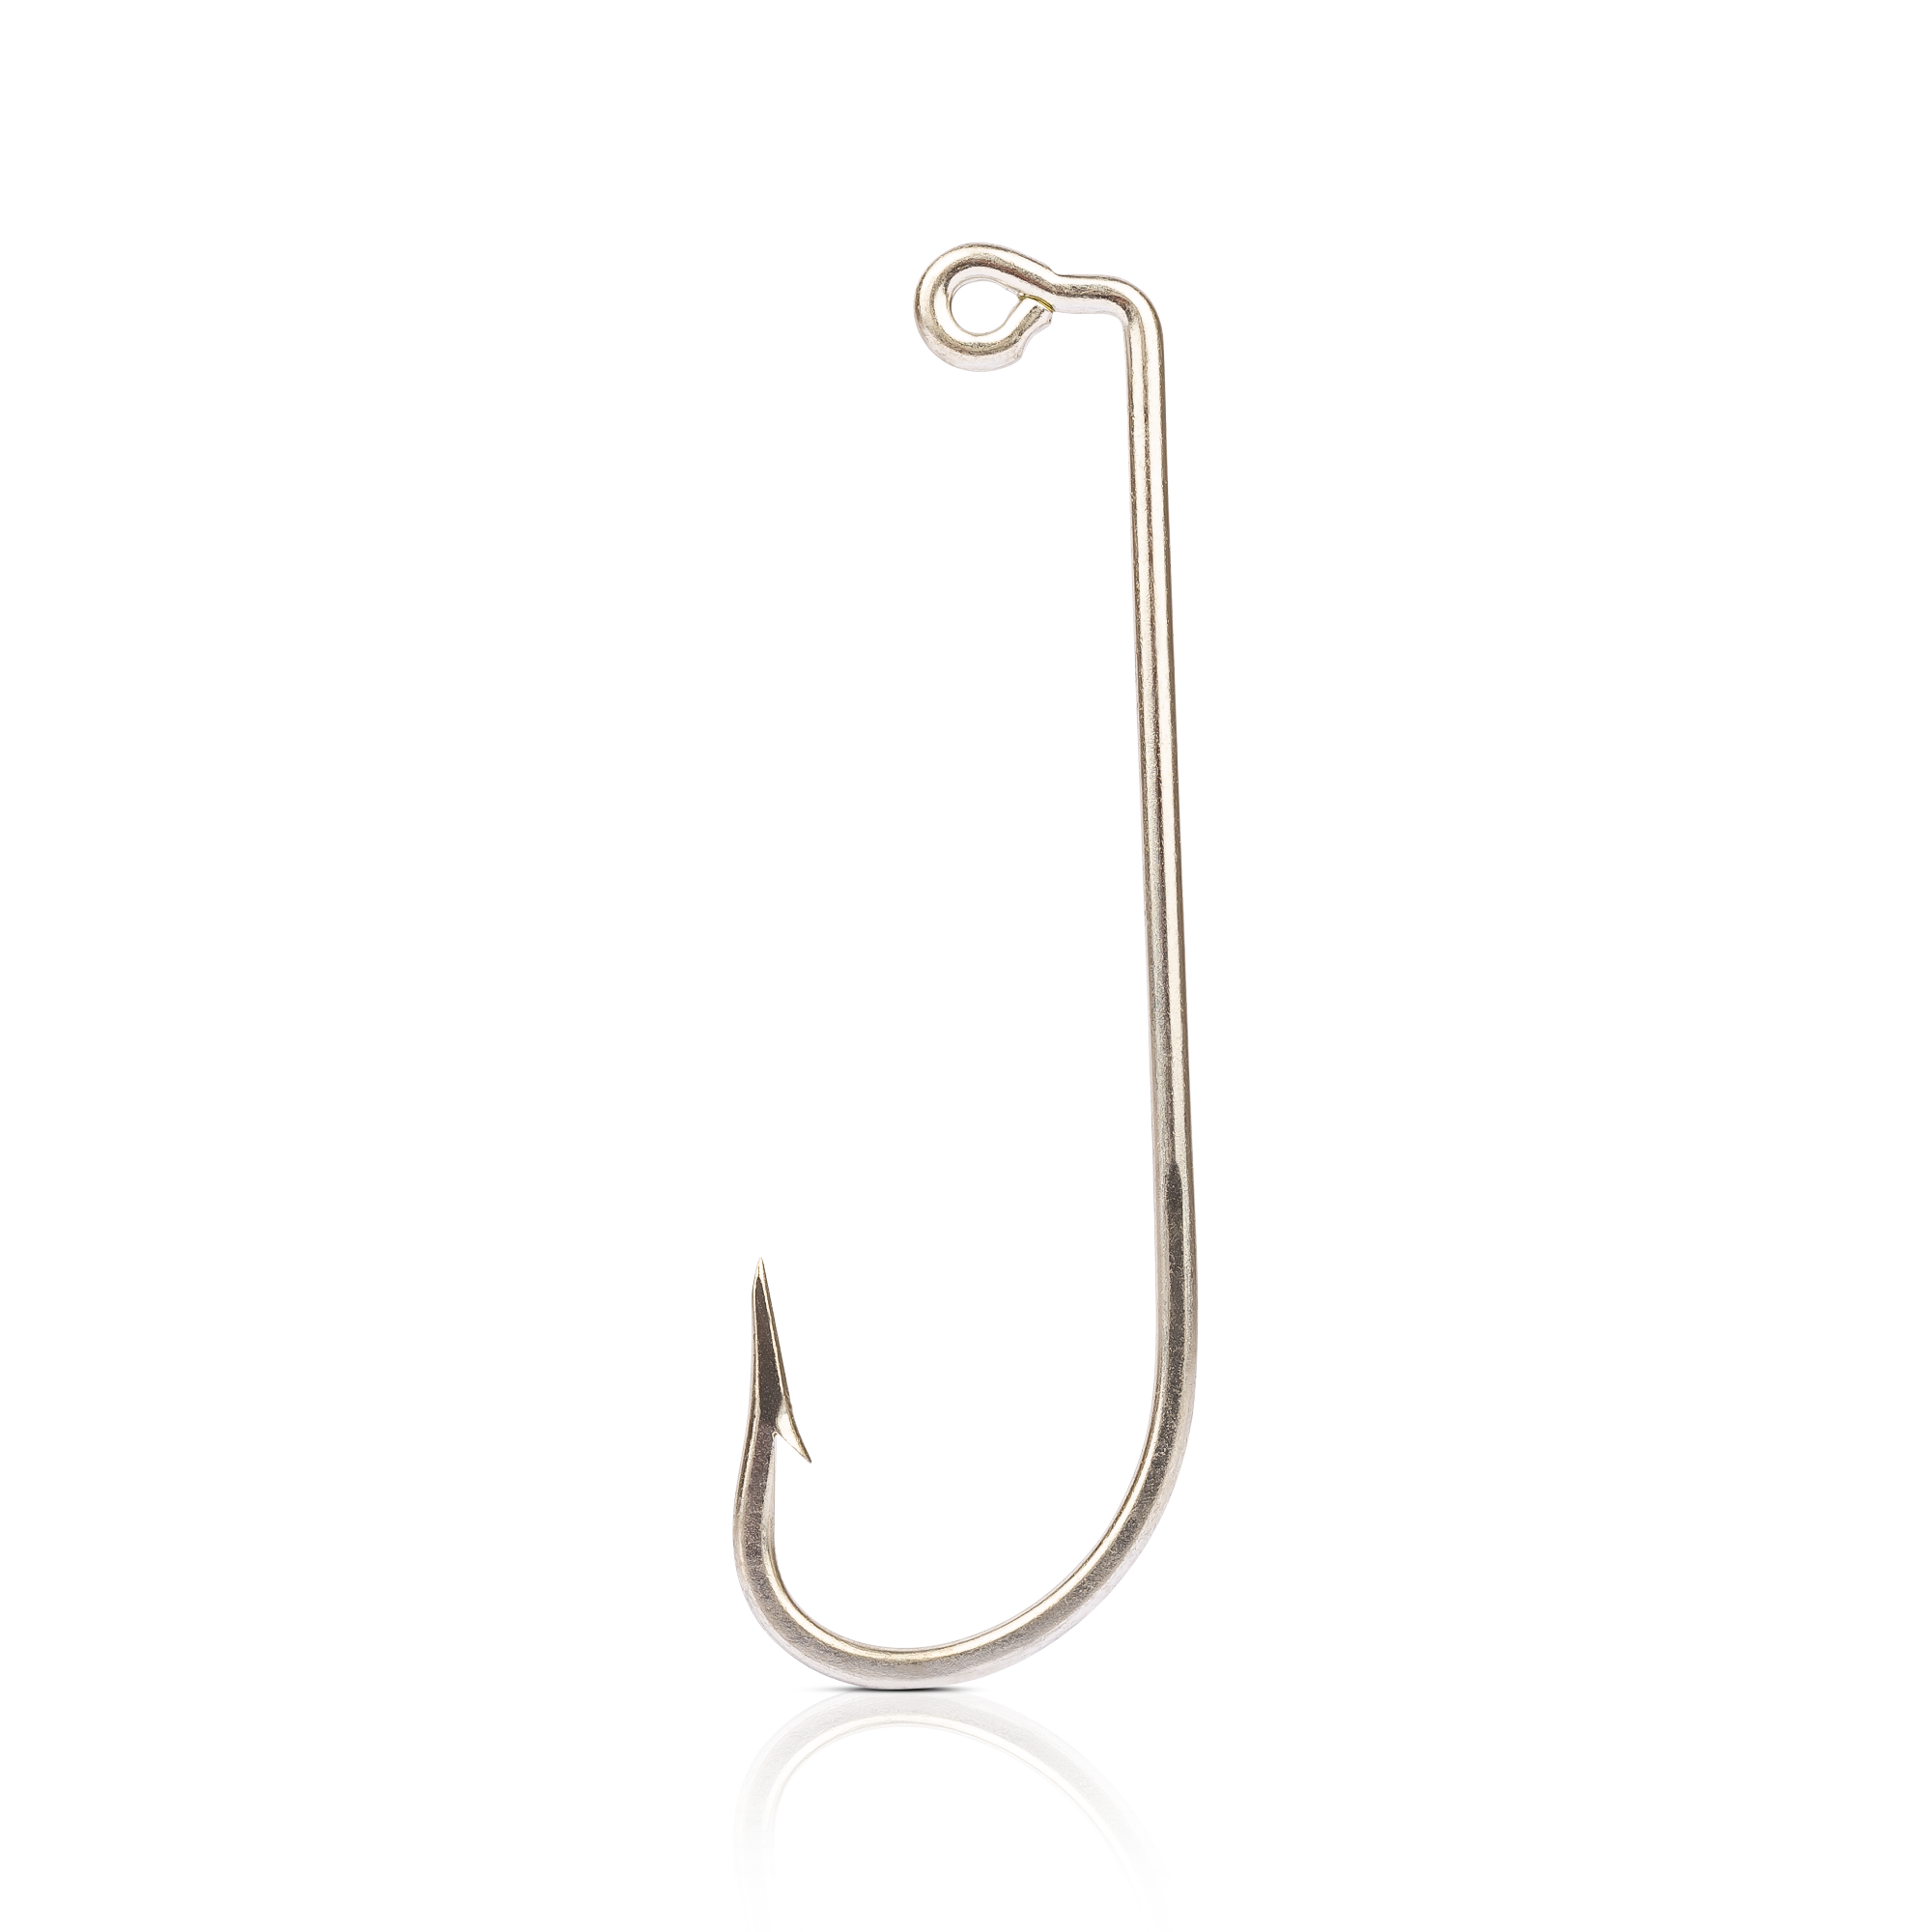 Mustad Stainless O'shaughnessy Hooks